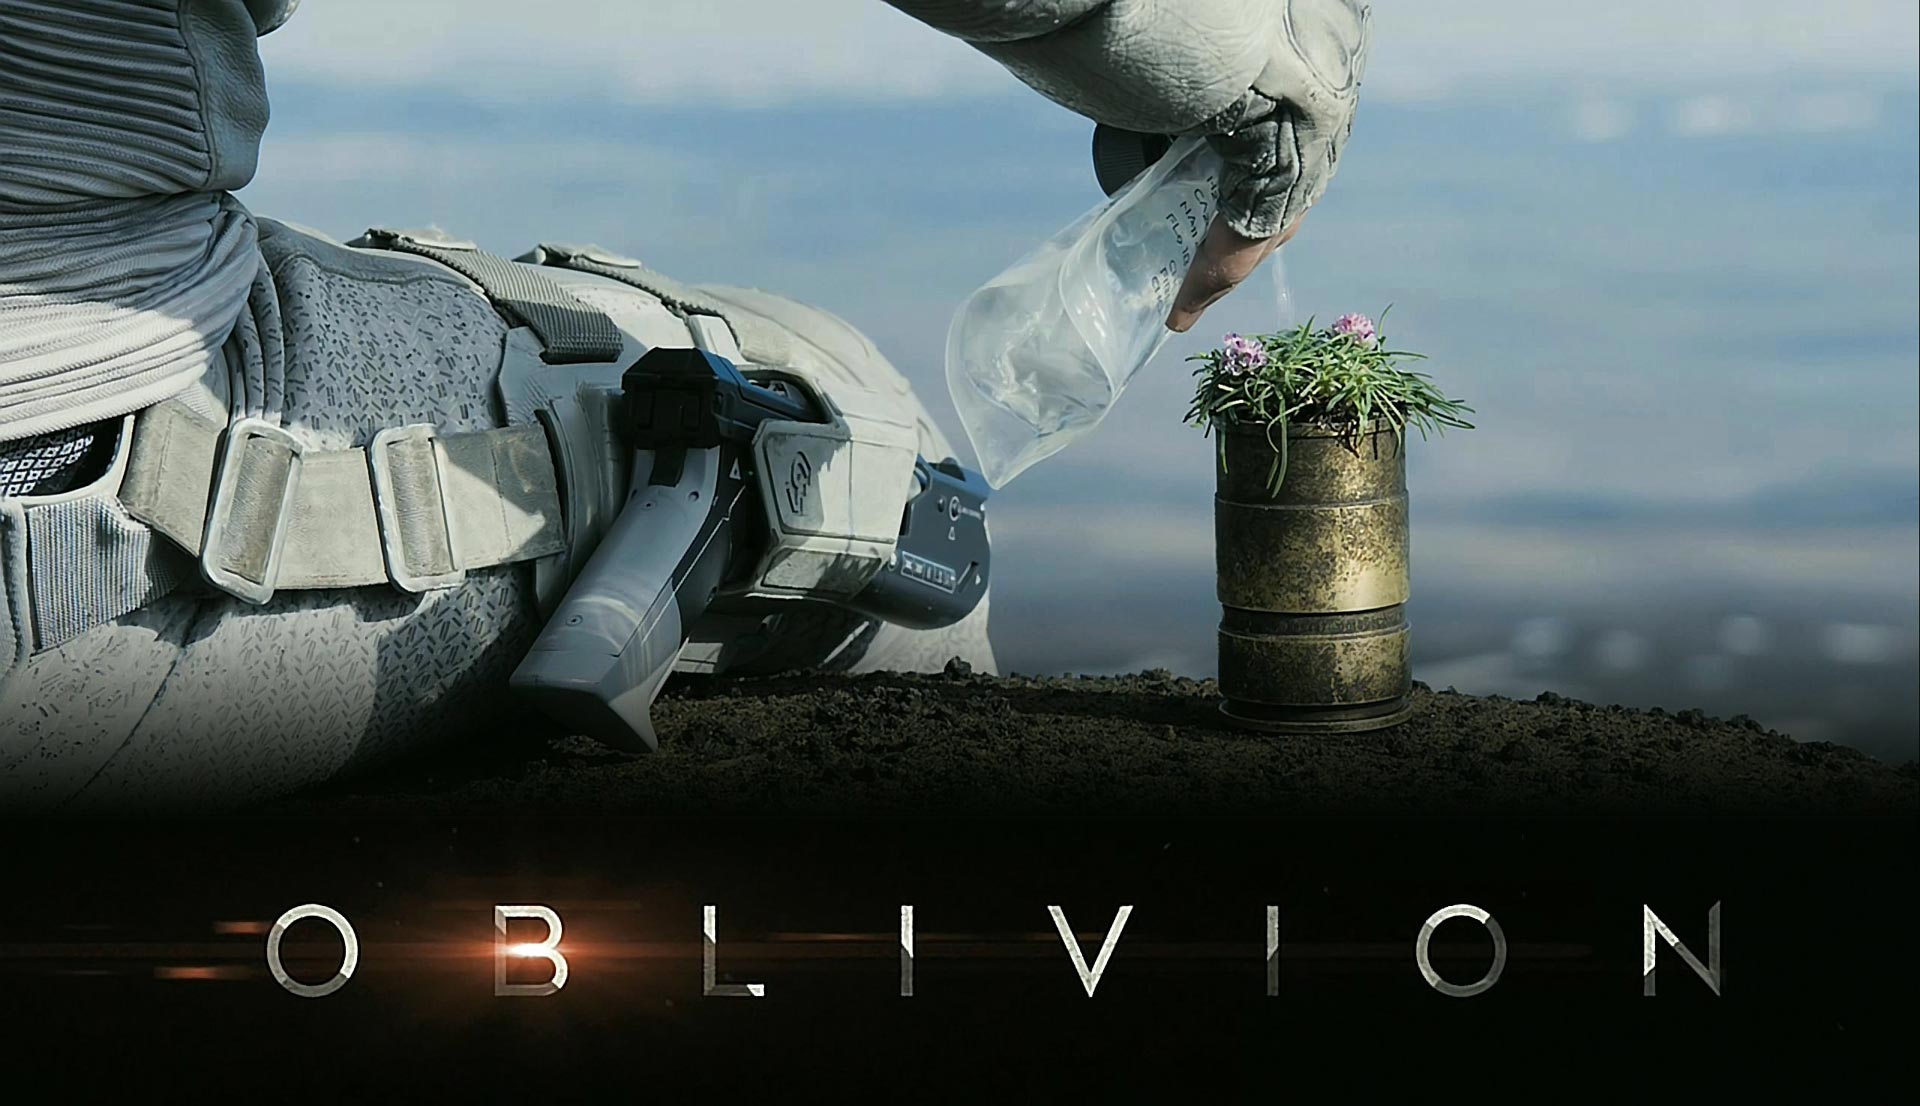 Movie Review: Oblivion has great action with Tom Cruise